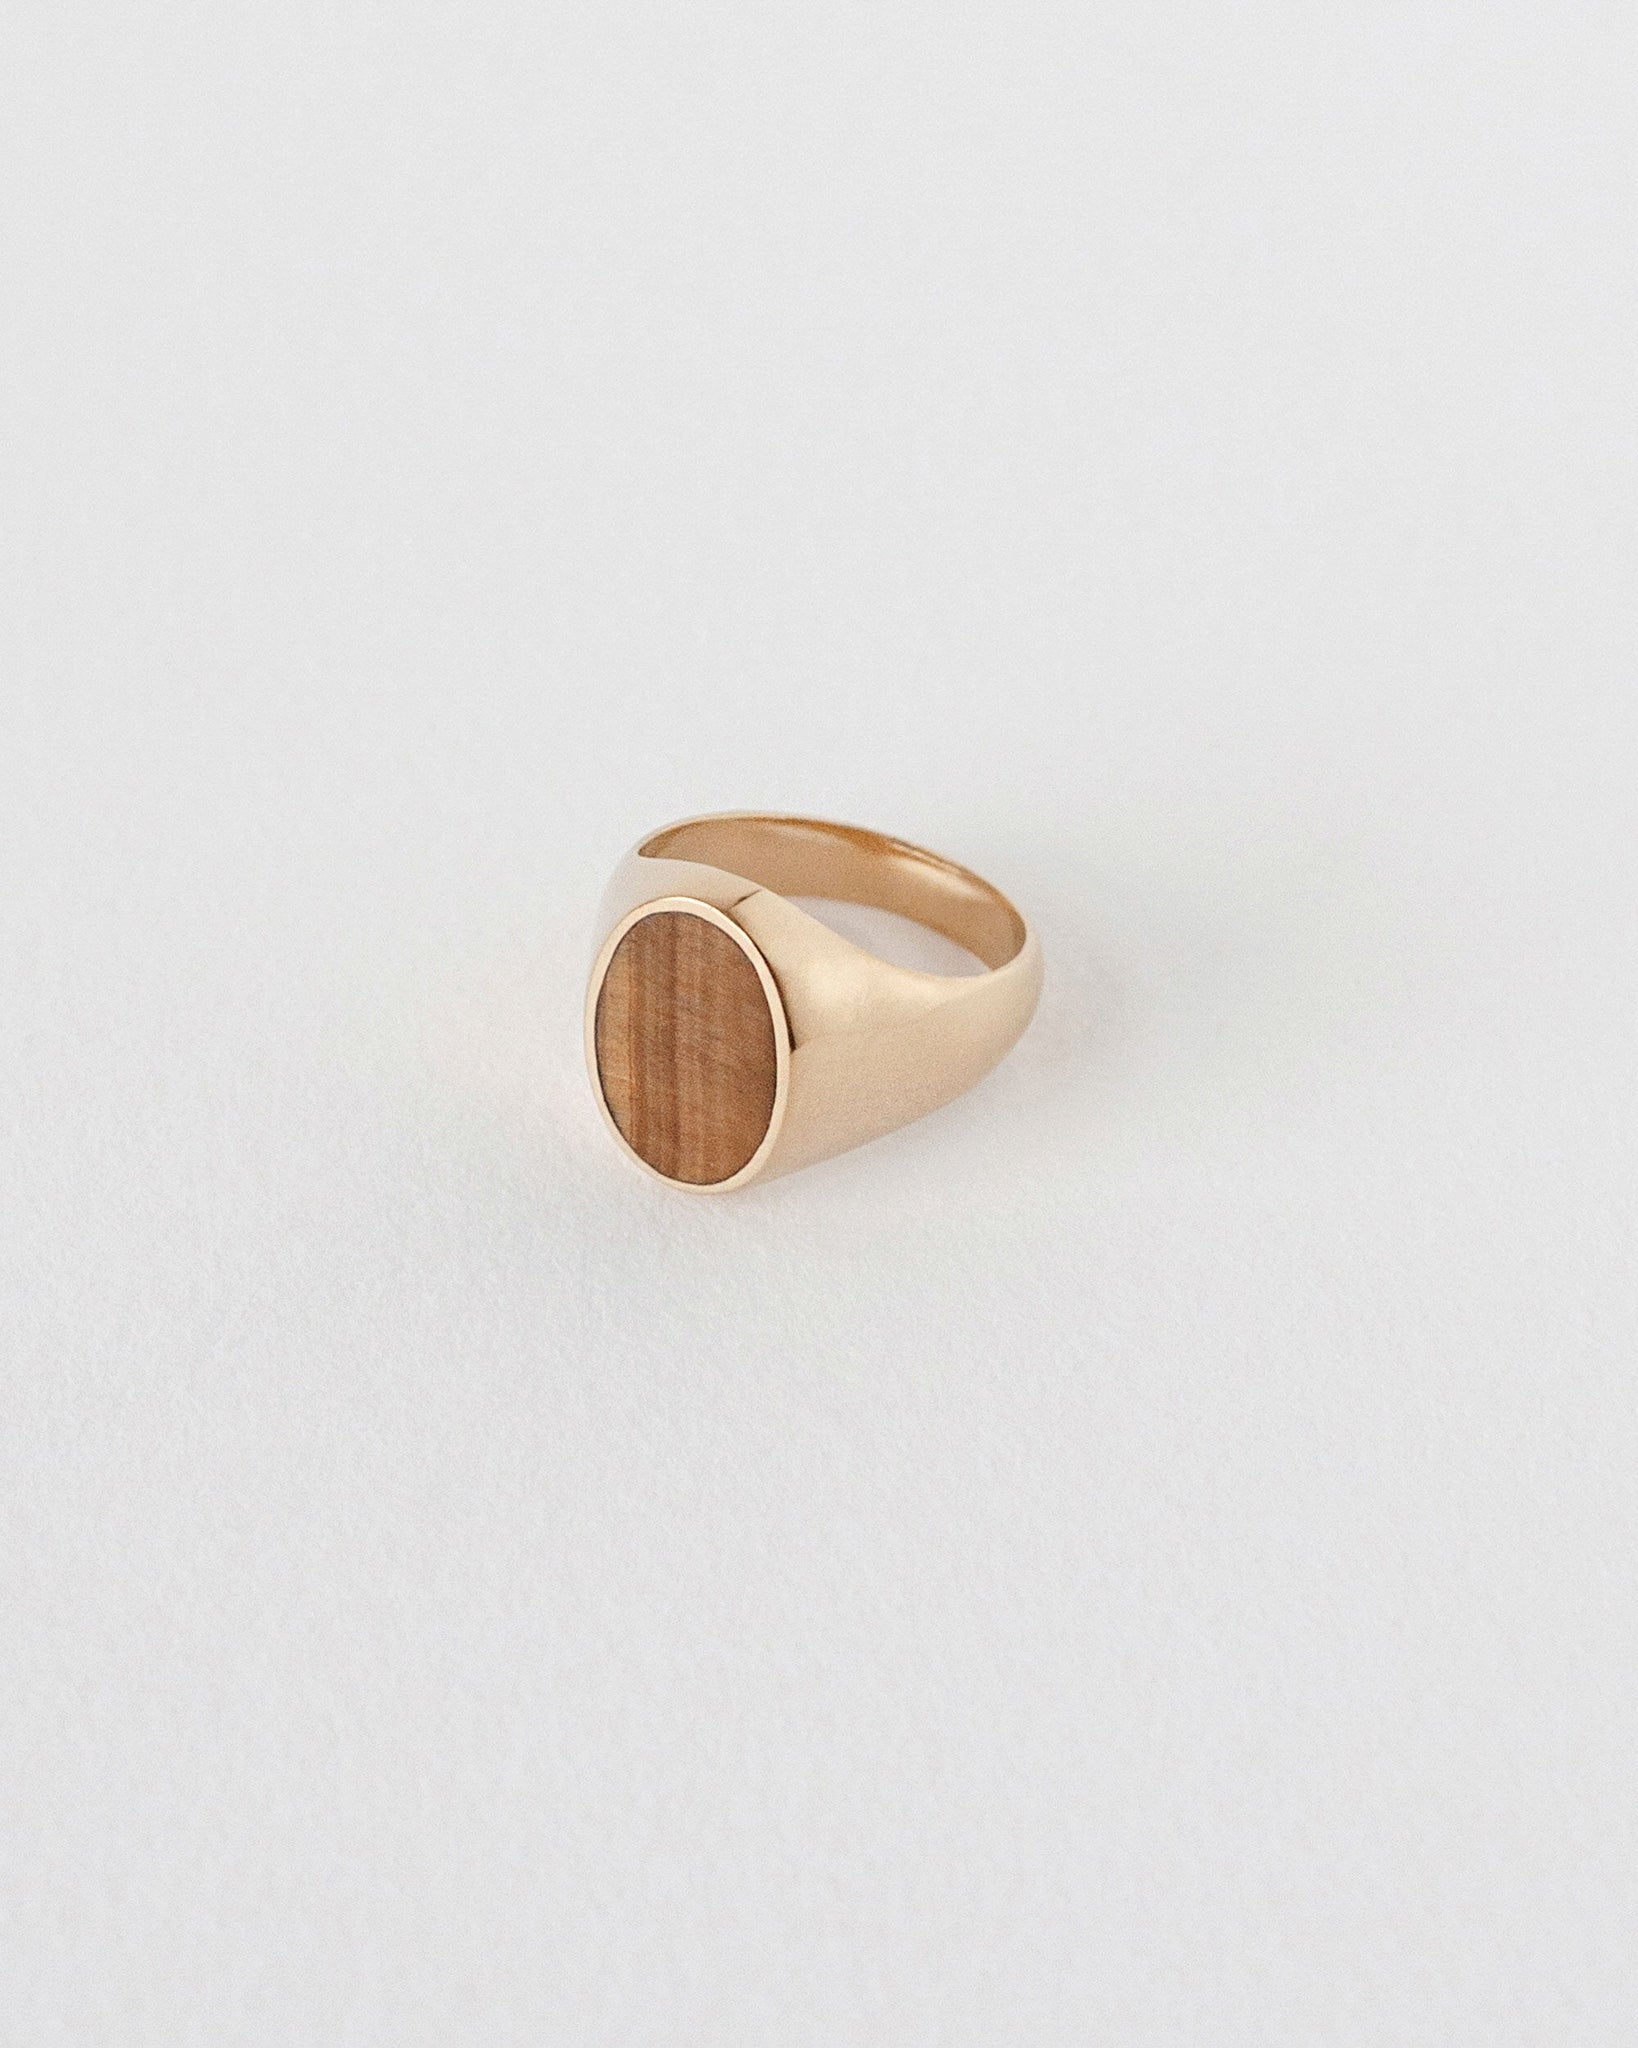 SEED RING | TIGER'S EYE - 2ND QUALITY